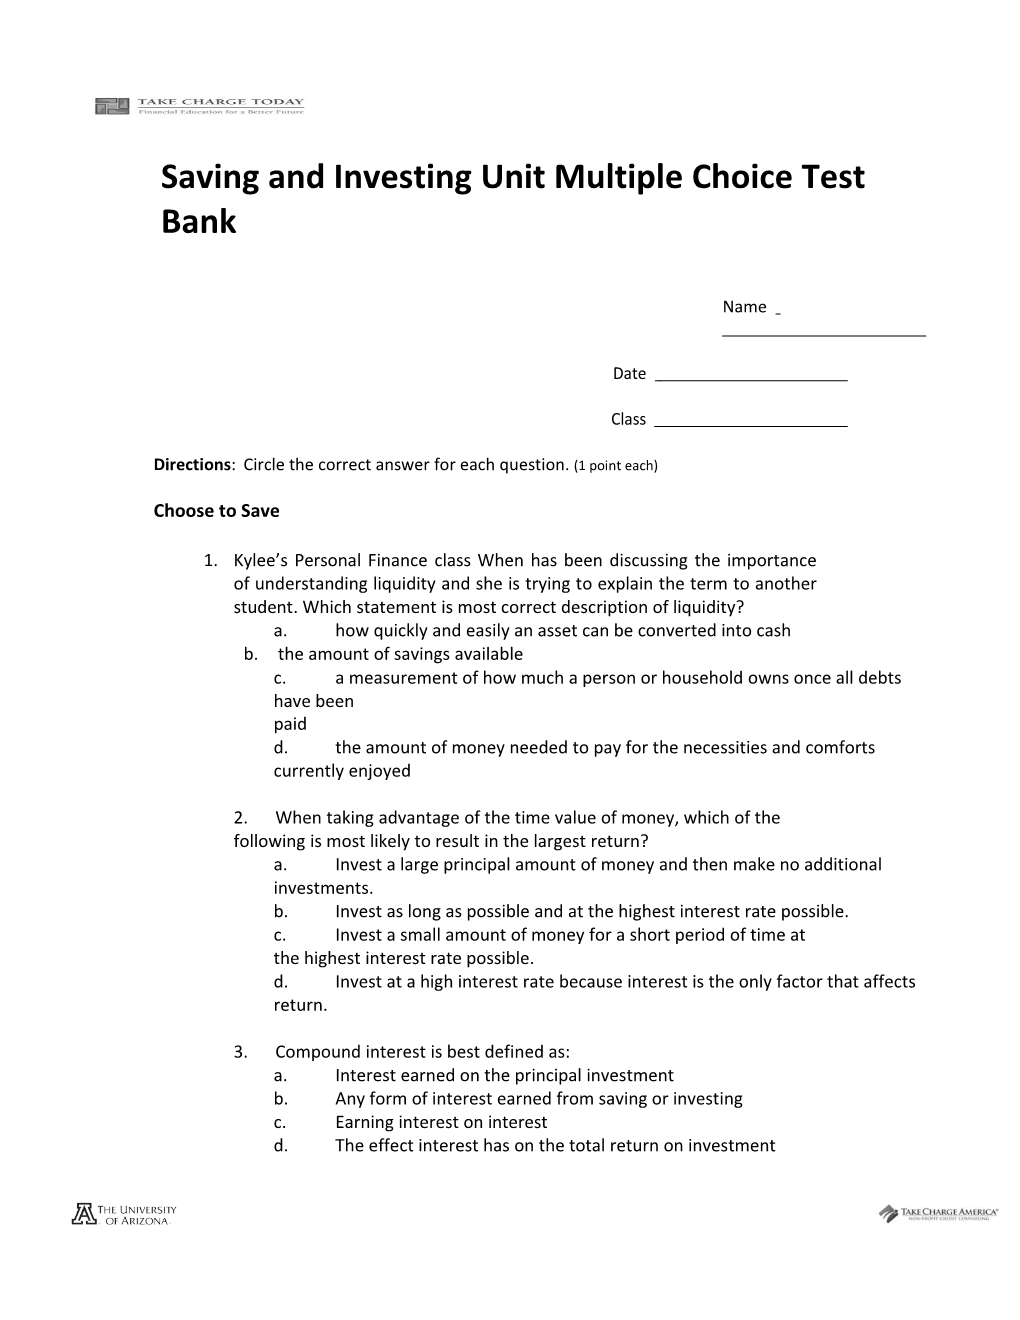 Saving and Investing Unit Multiple Choice Test Bank 2.4.0.M1